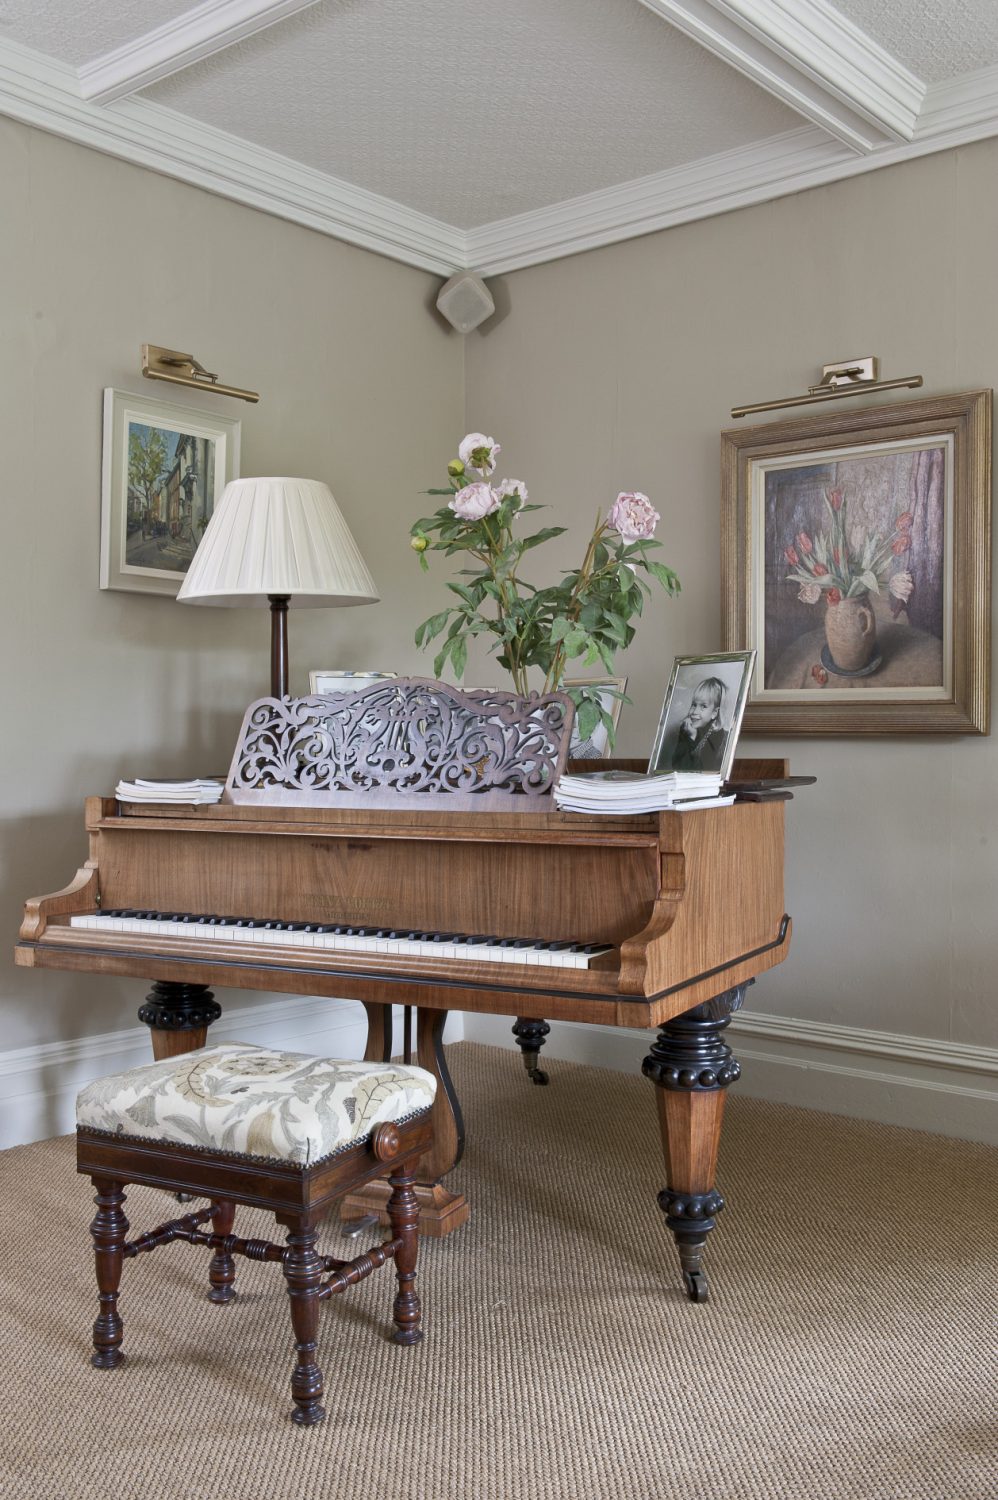 To the left of the piano hangs a painting by Karl Terry, an artist that Belinda particularly admires. As well as being an acclaimed local artist, Karl is also known as a roofing expert with a specialist knowledge of Kent pegs